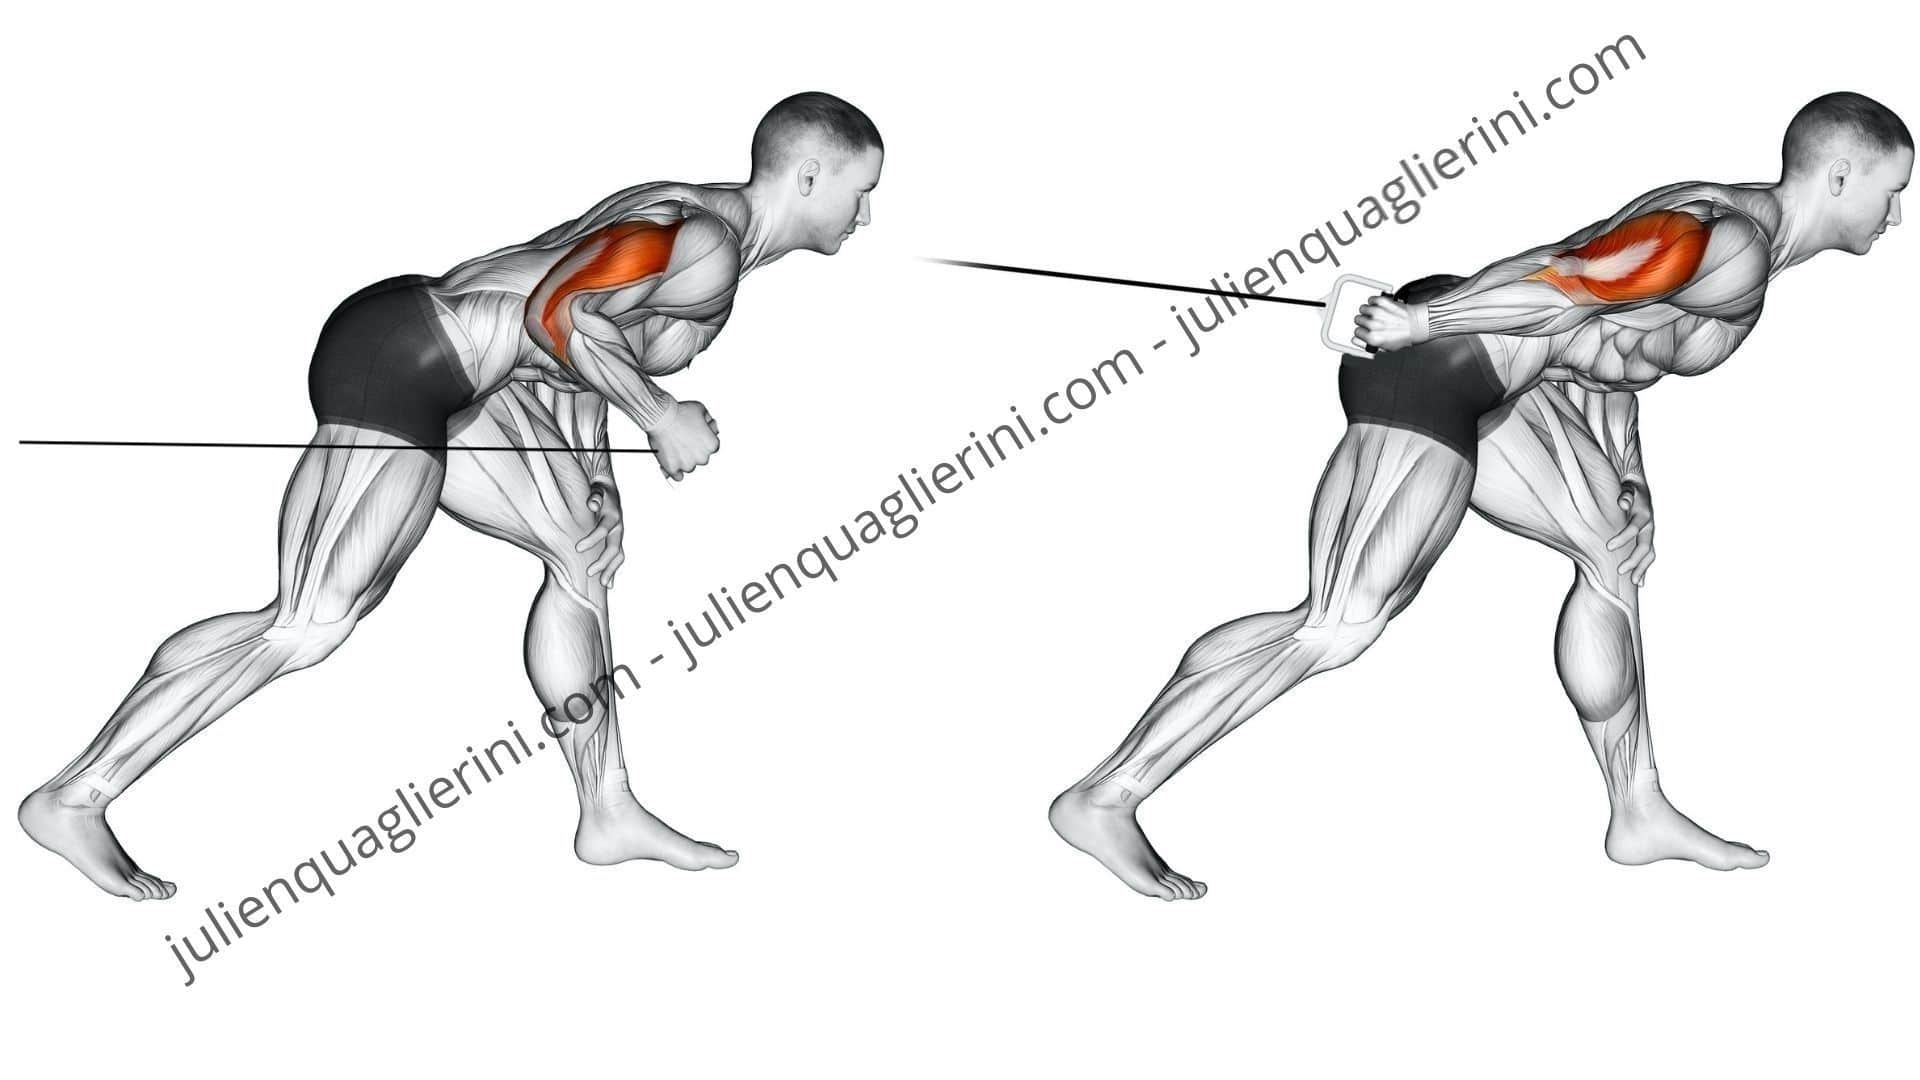 How to perform the pulley kickback exercise correctly?